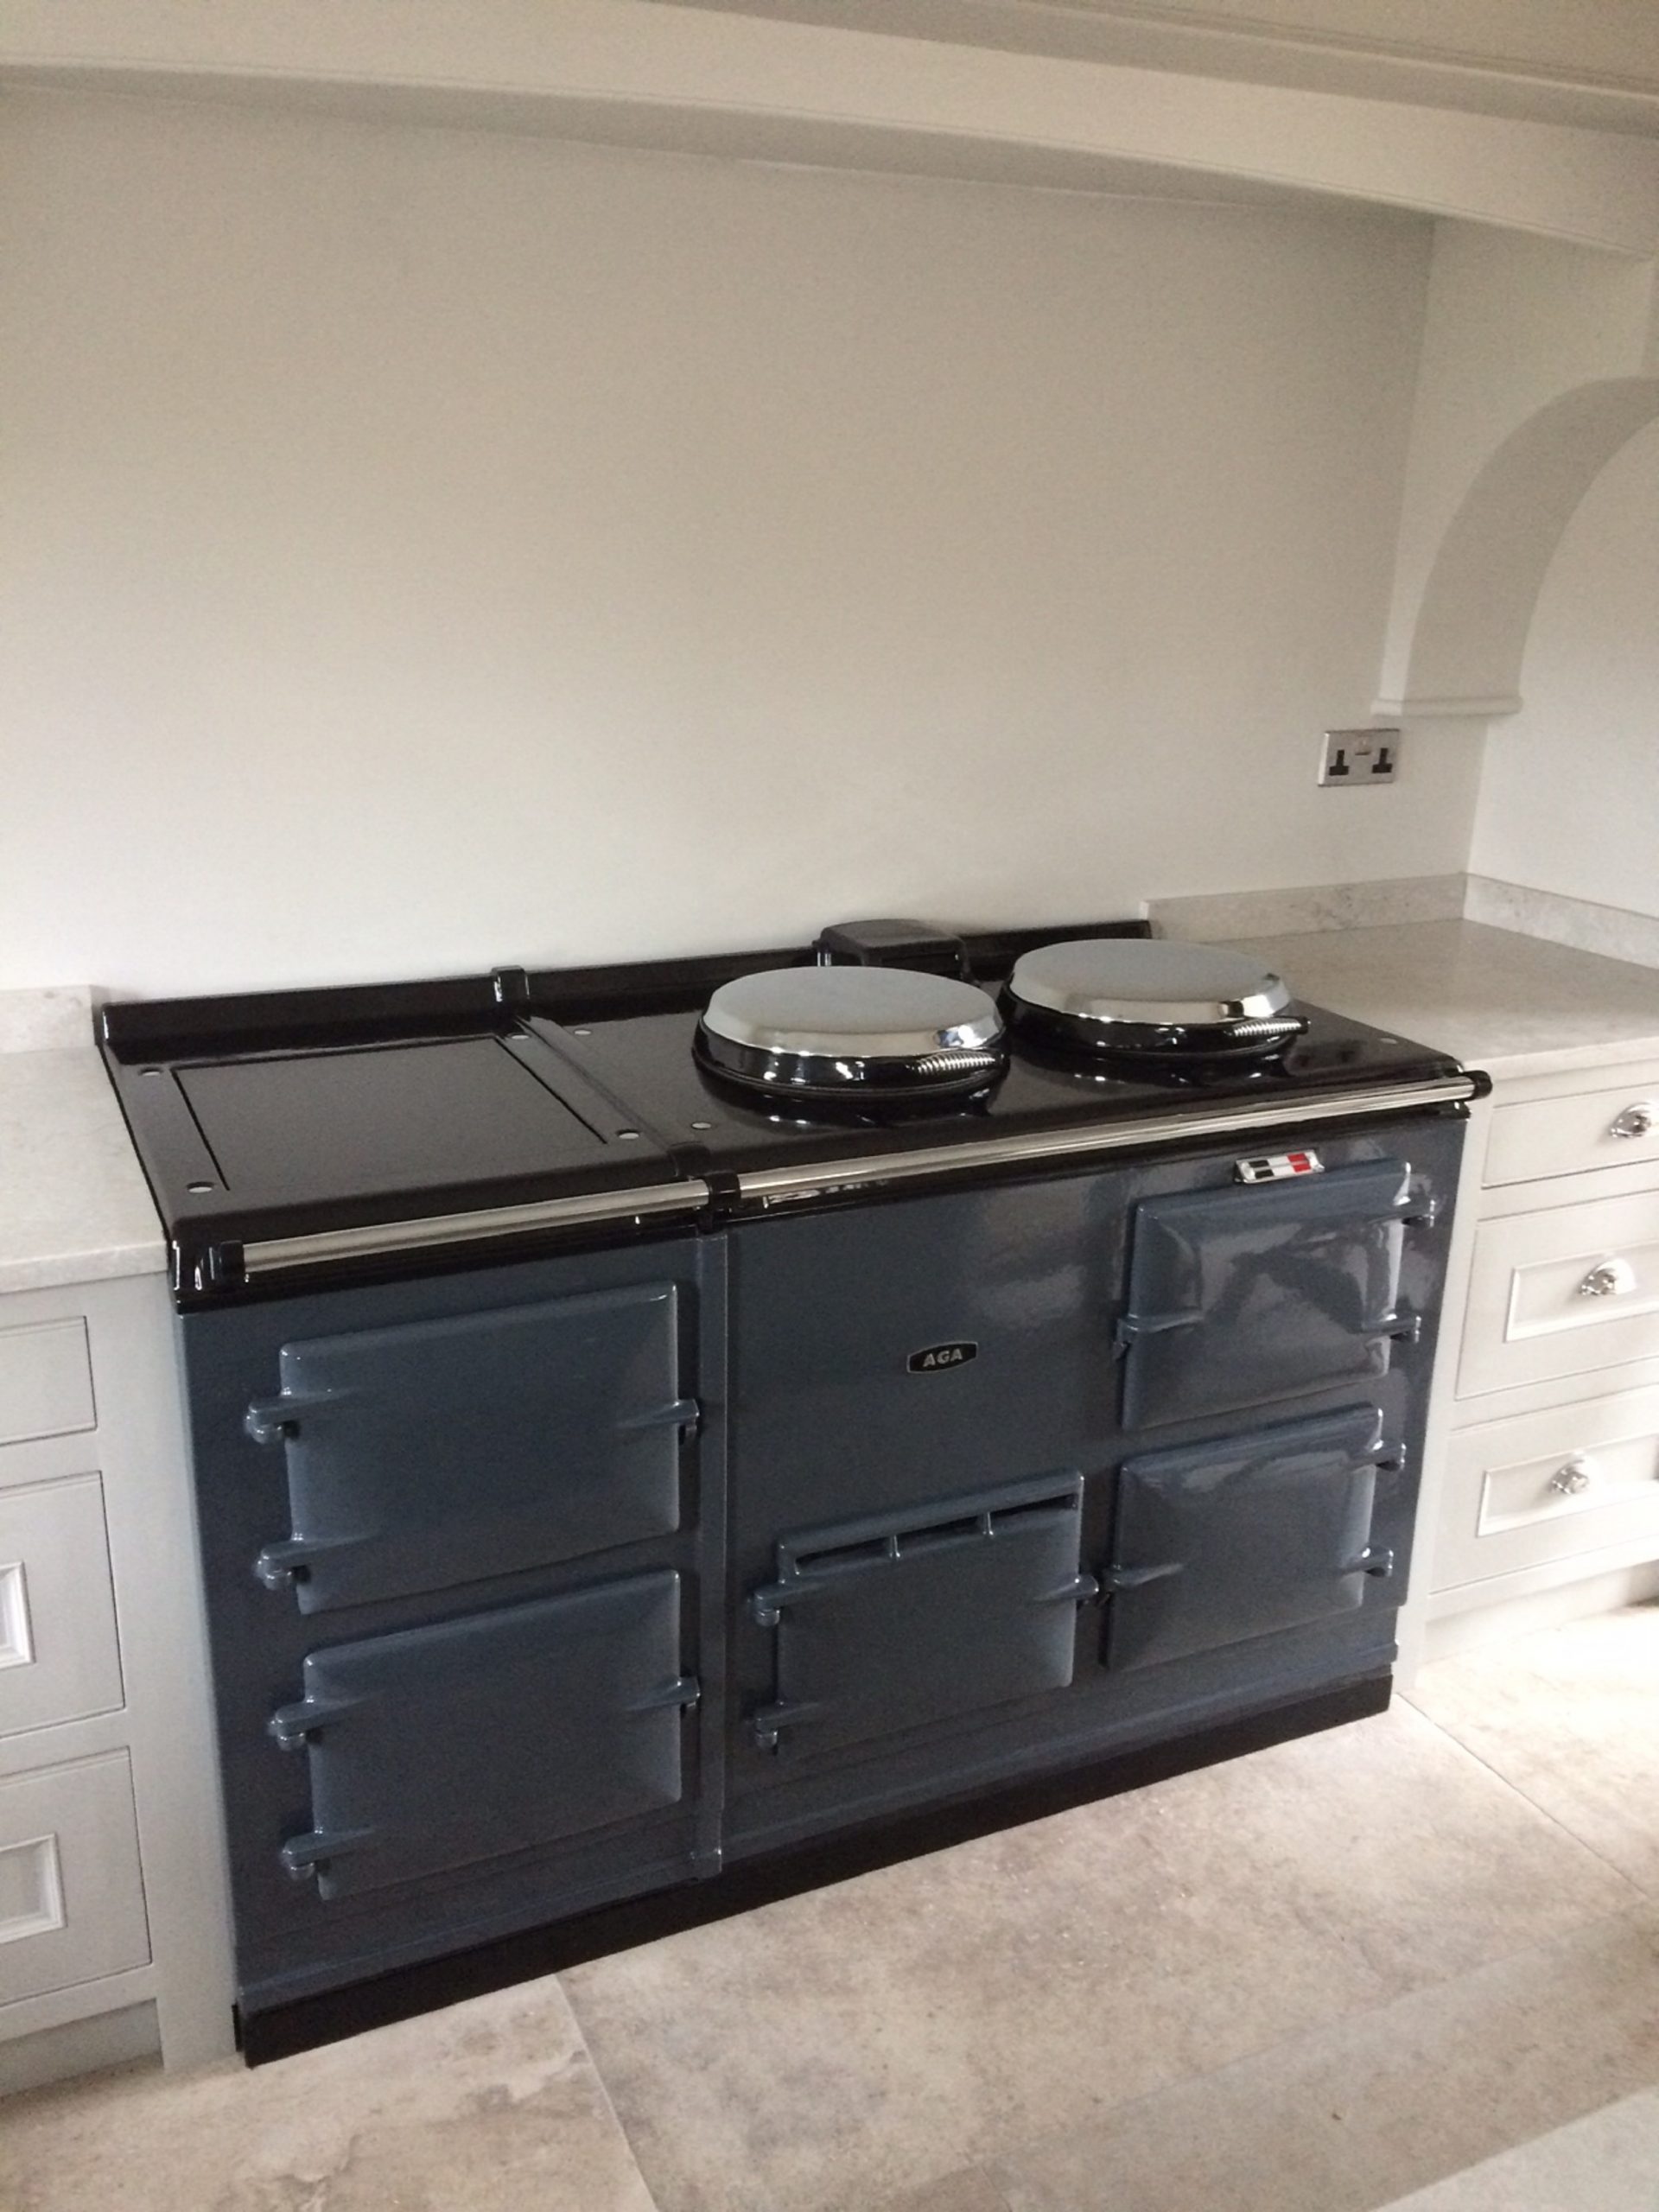 AGA 4 Oven Fully Reconditioned Natural Gas or LPG Fired Aga Range Cooker  30 Colours 